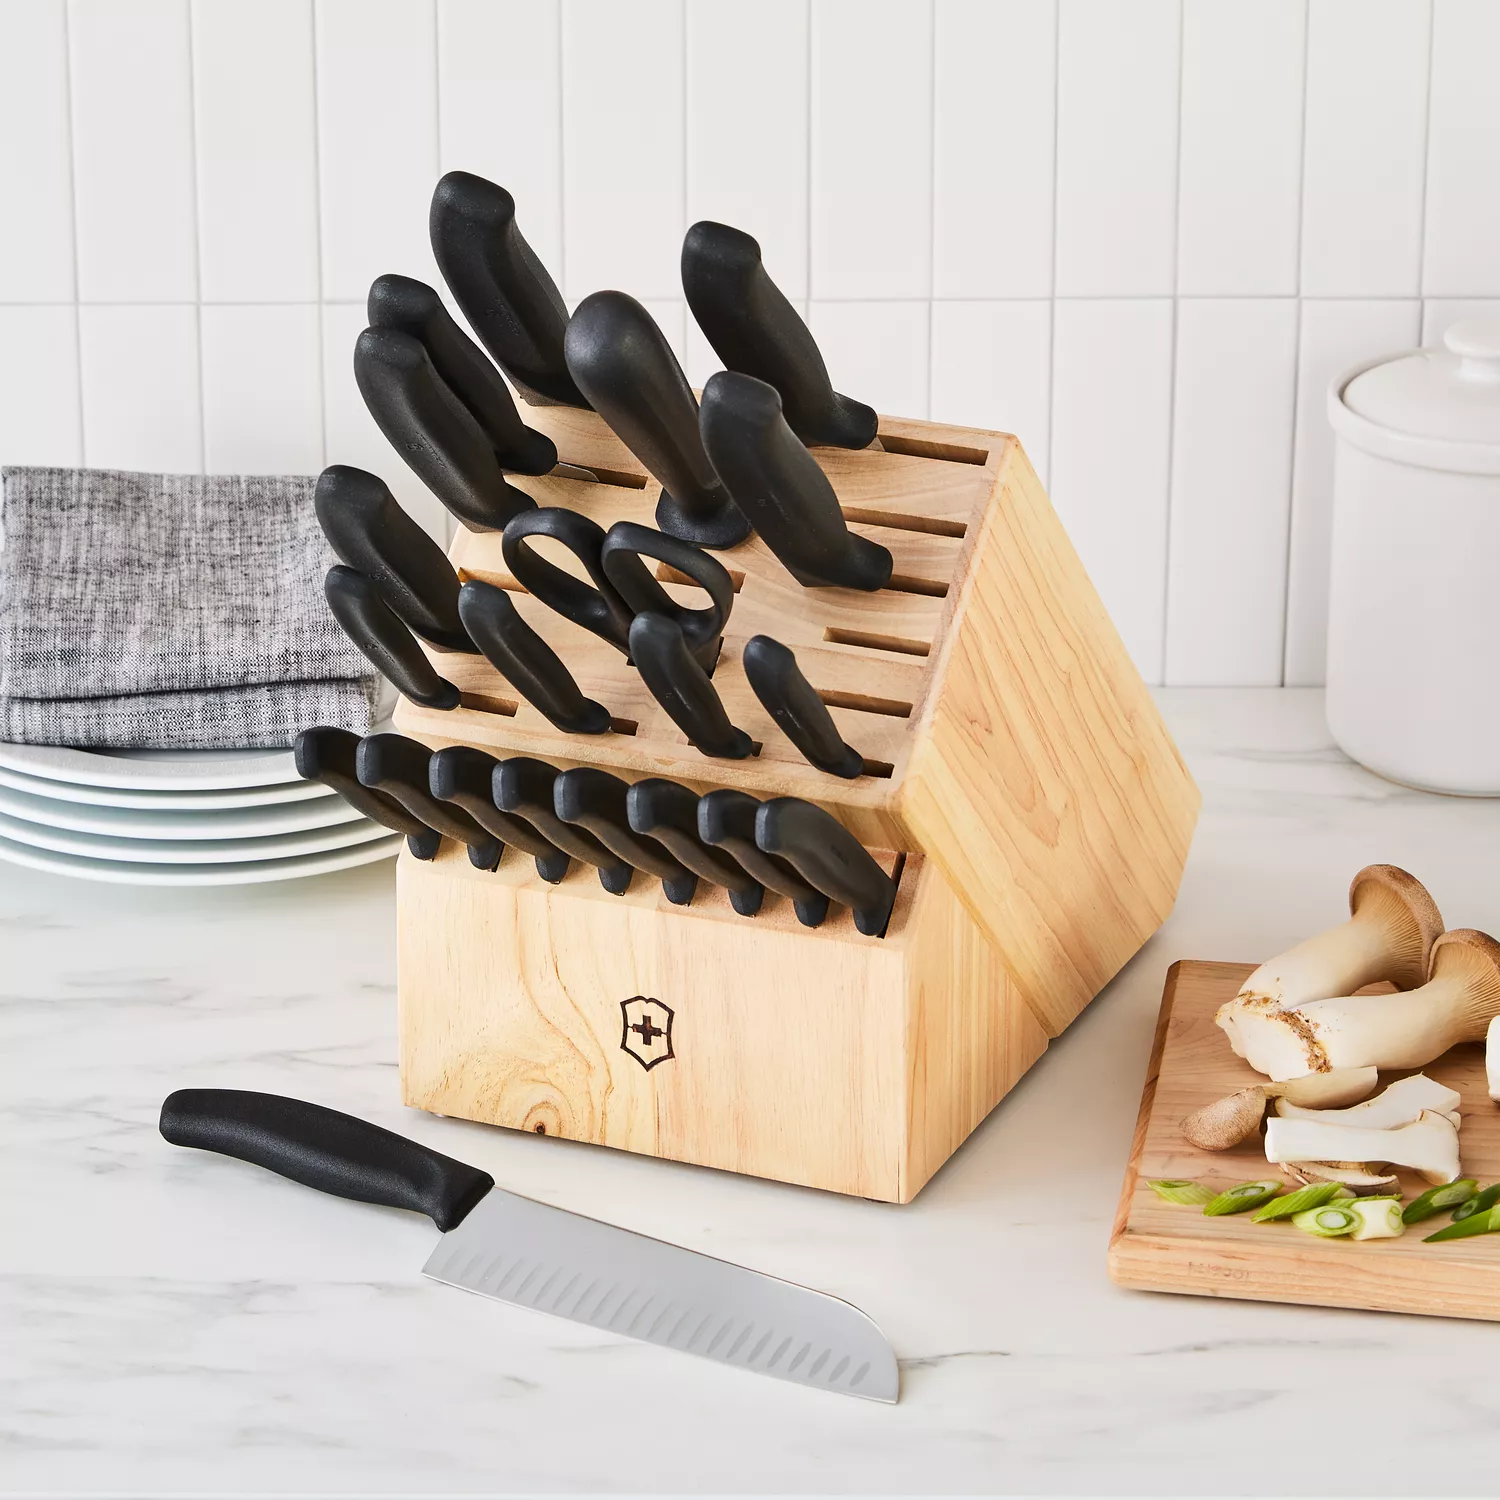 KITCHEN AID KNIFE BLOCK AND REPLACEMENT KNIFE KNIVES: U Pick and